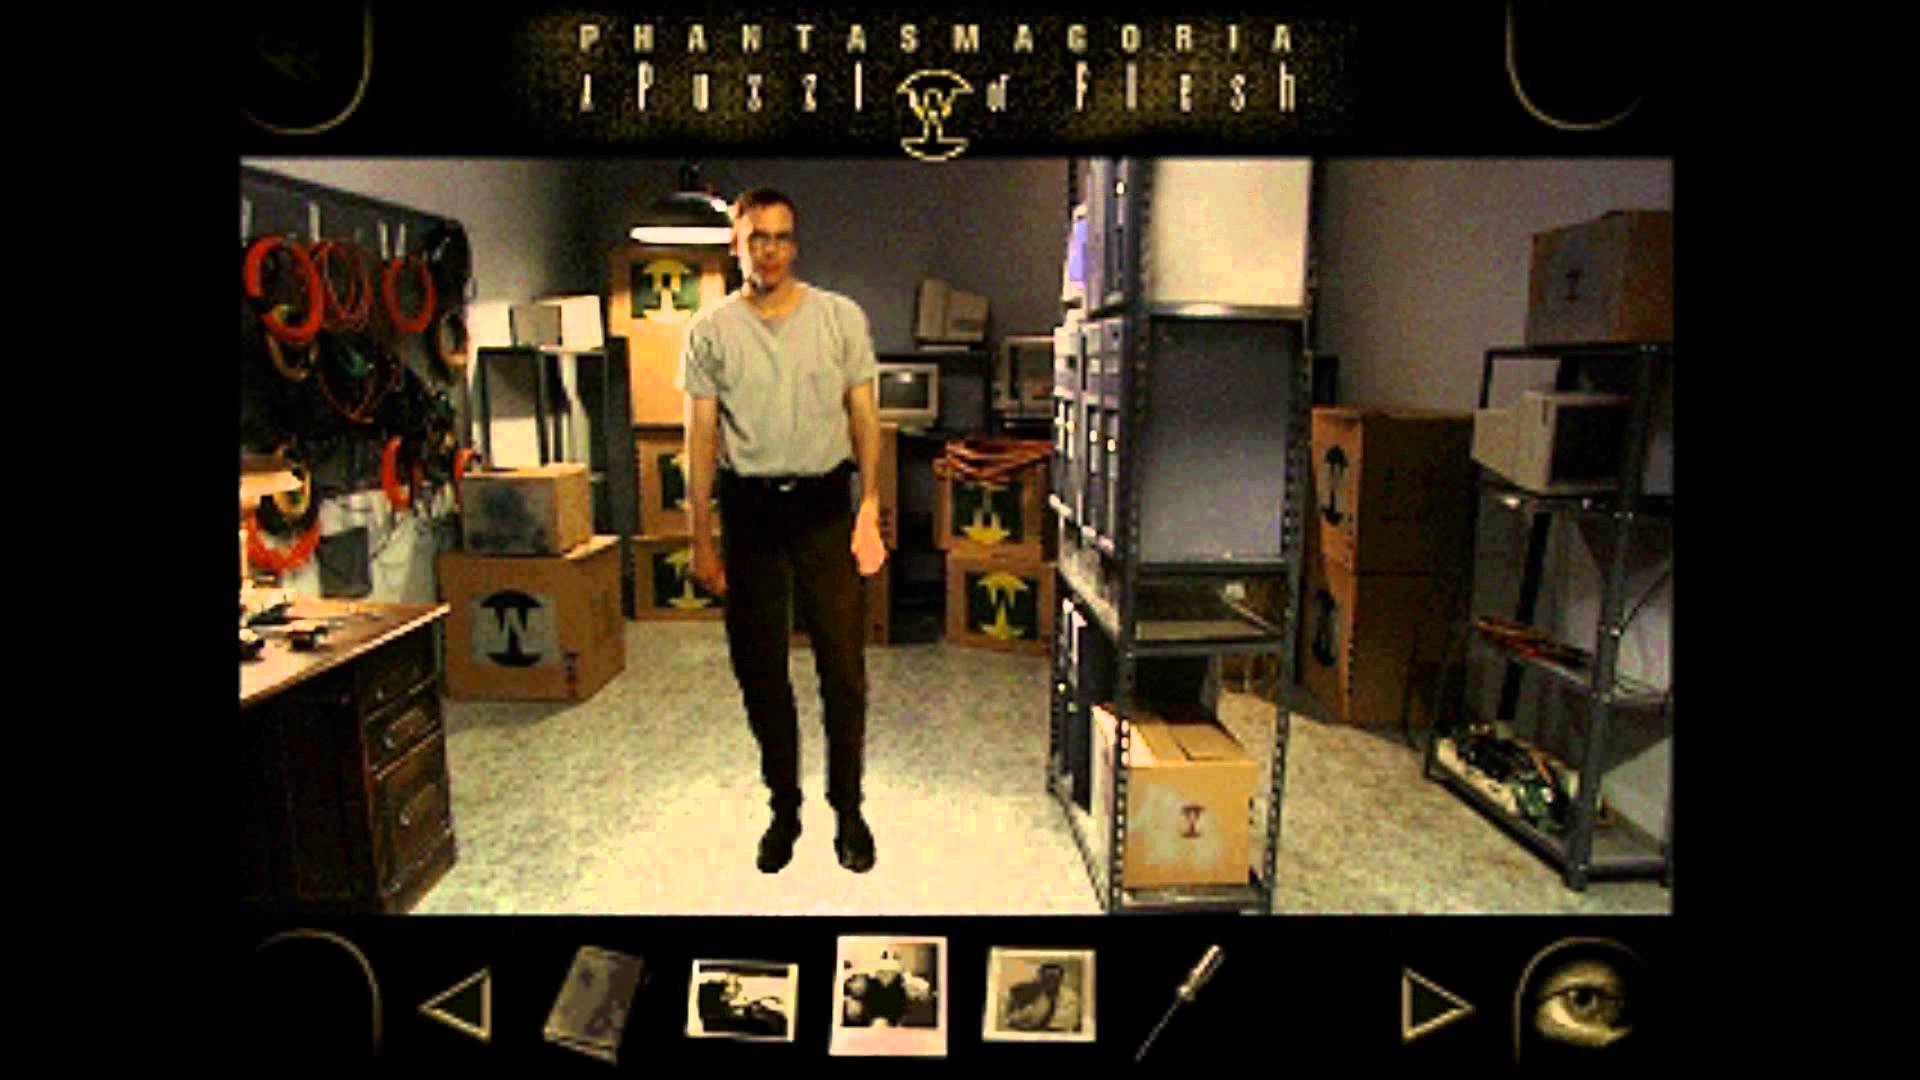 They Don’t Make Games (Or Trailers) Like Phantasmagoria 2 Anymore